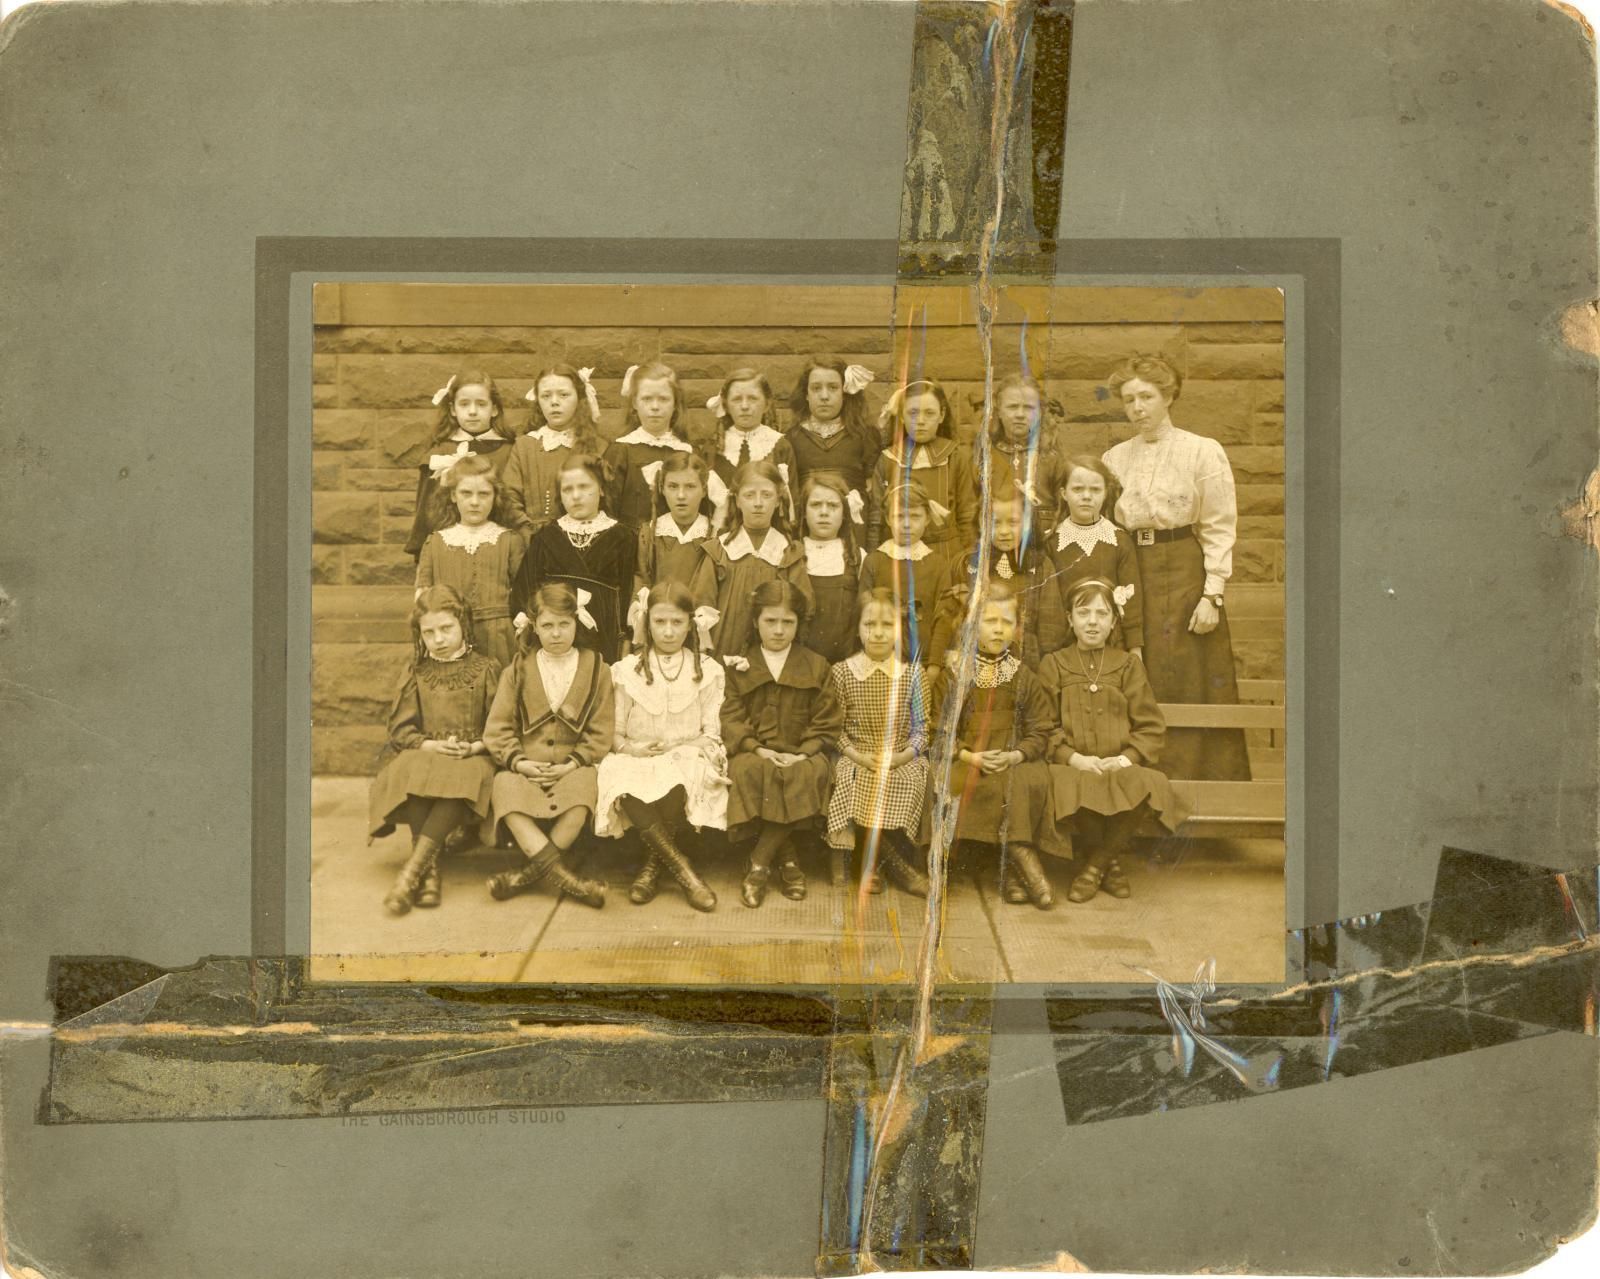 An old sepia photograph taped into an album page with yellowing tape, of a class of girls in rows with their teacher